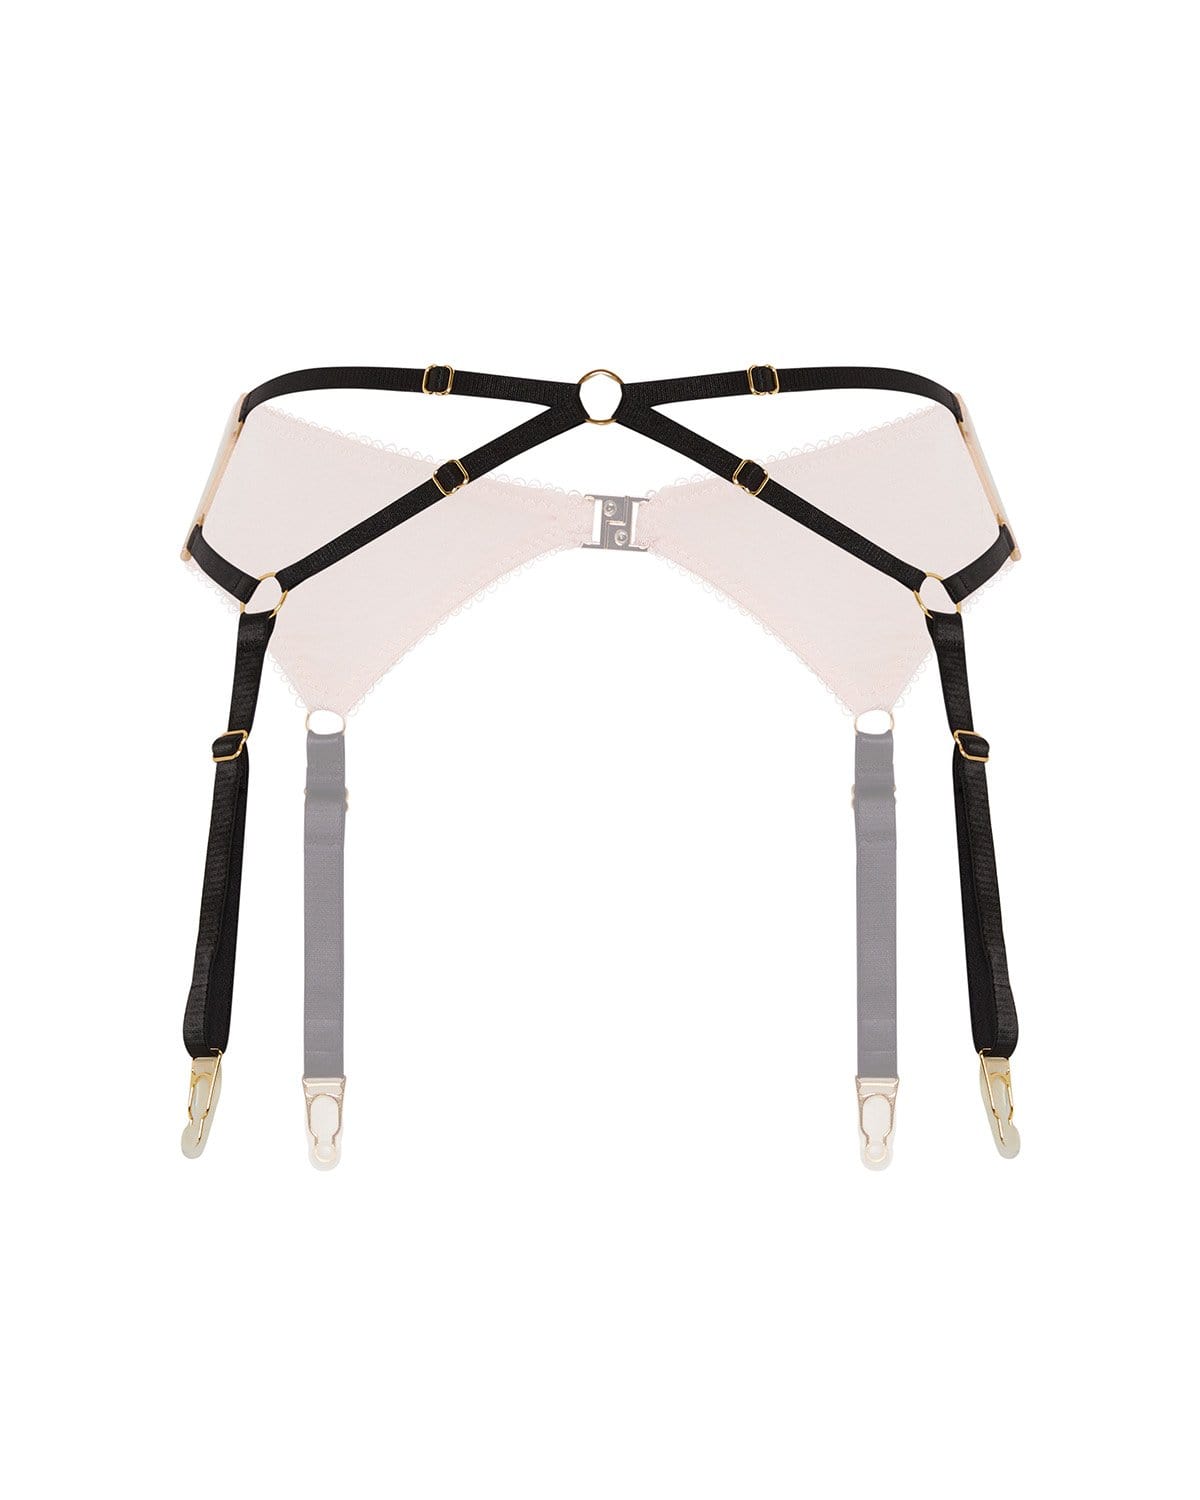 Vivi Leigh London lingerie Silk Jersey Suspenders- Blush Pink sexy harness luxury lingerie uk sustainable brand